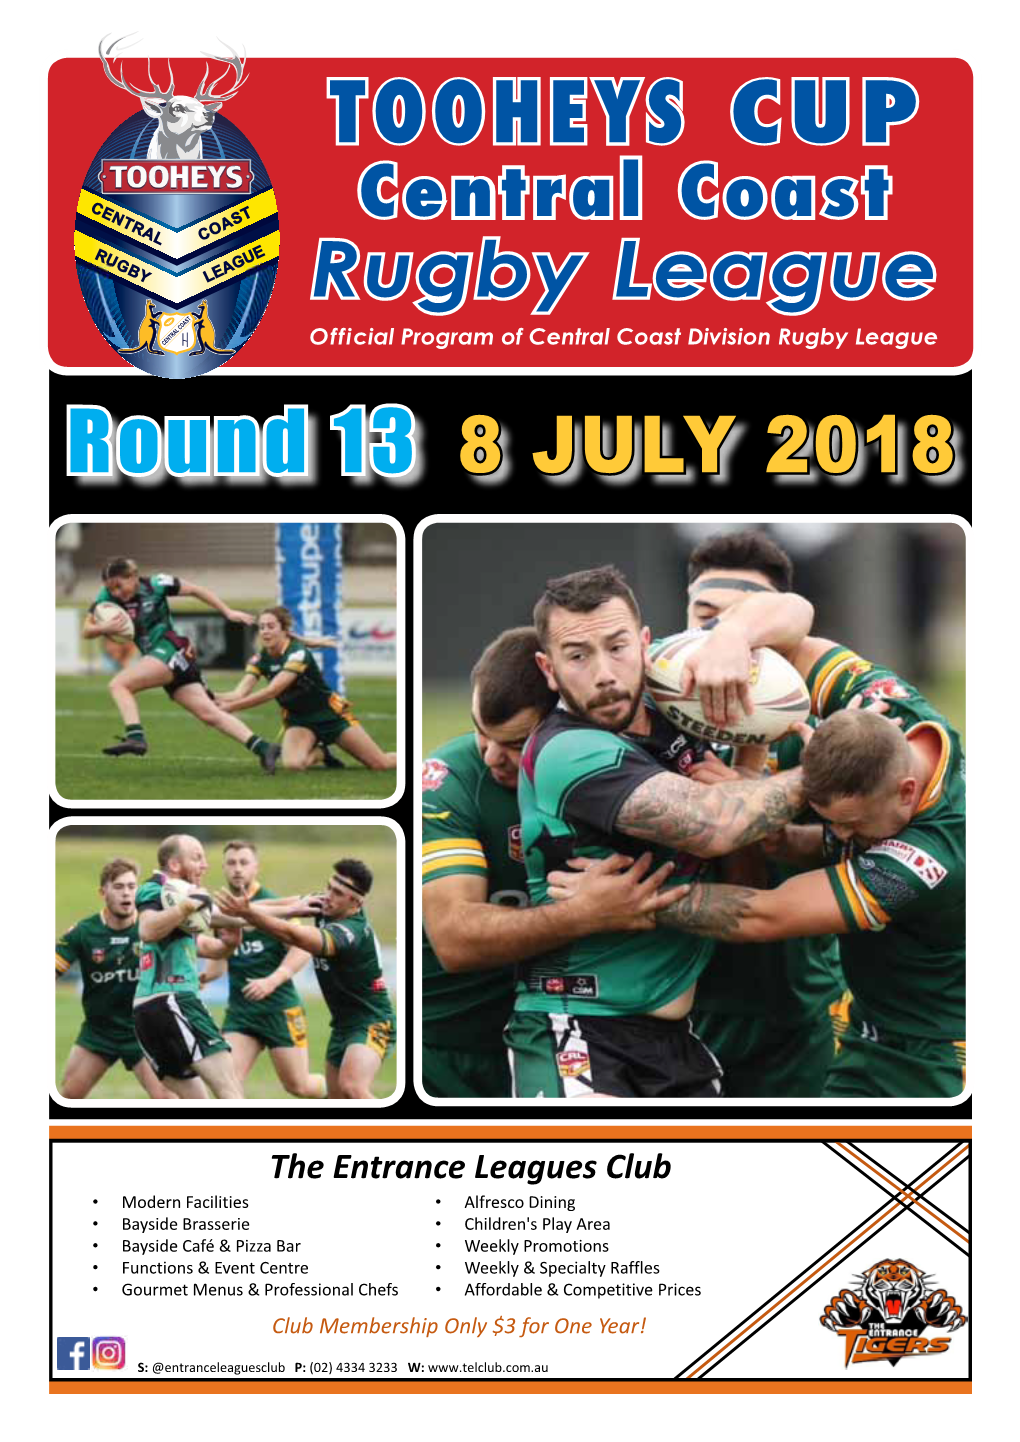 Central Coast Rugby League Official Program of Central Coast Division Rugby League